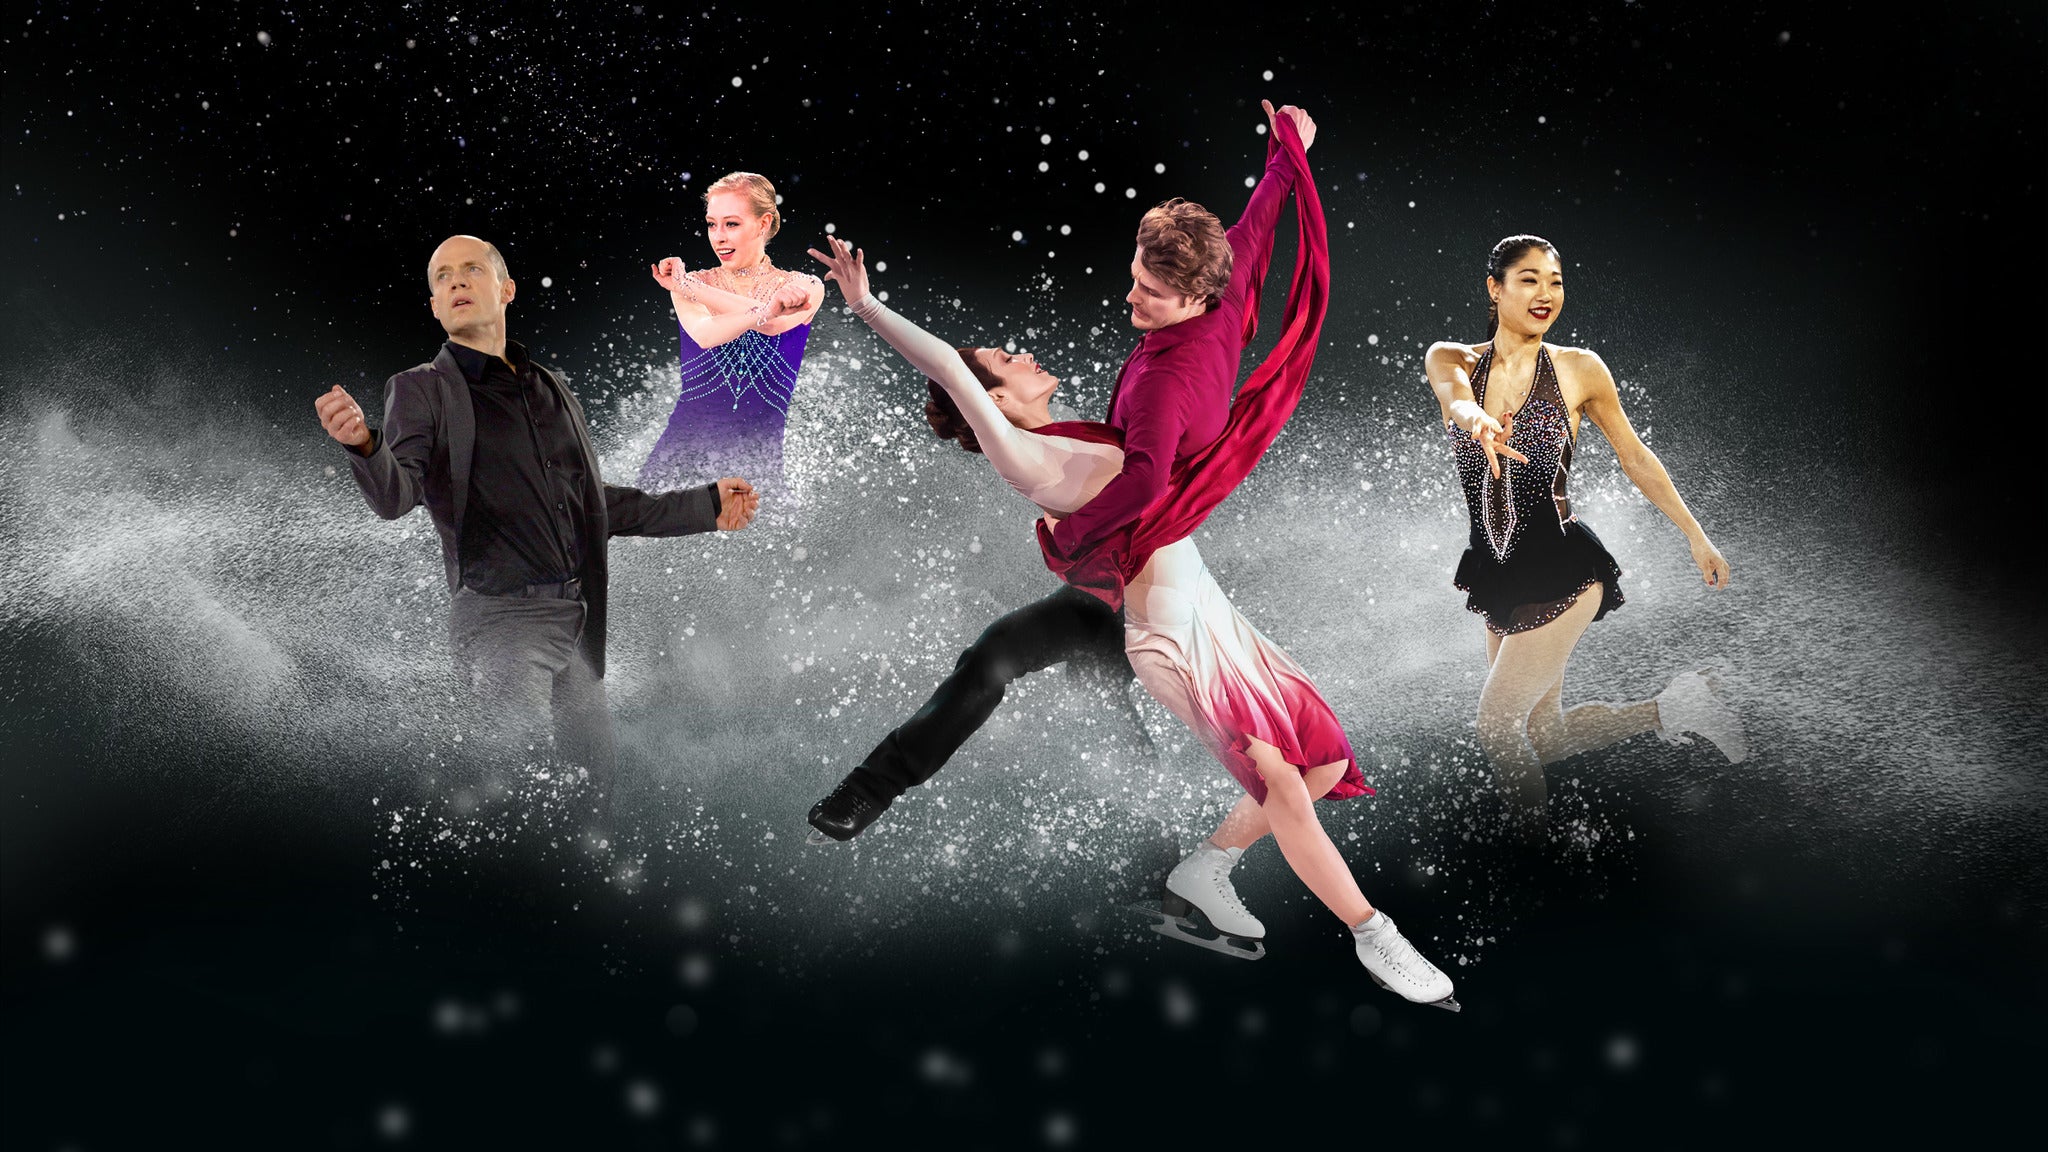 Stars On Ice Holiday - U.S. in Moline promo photo for Official Platinum presale offer code